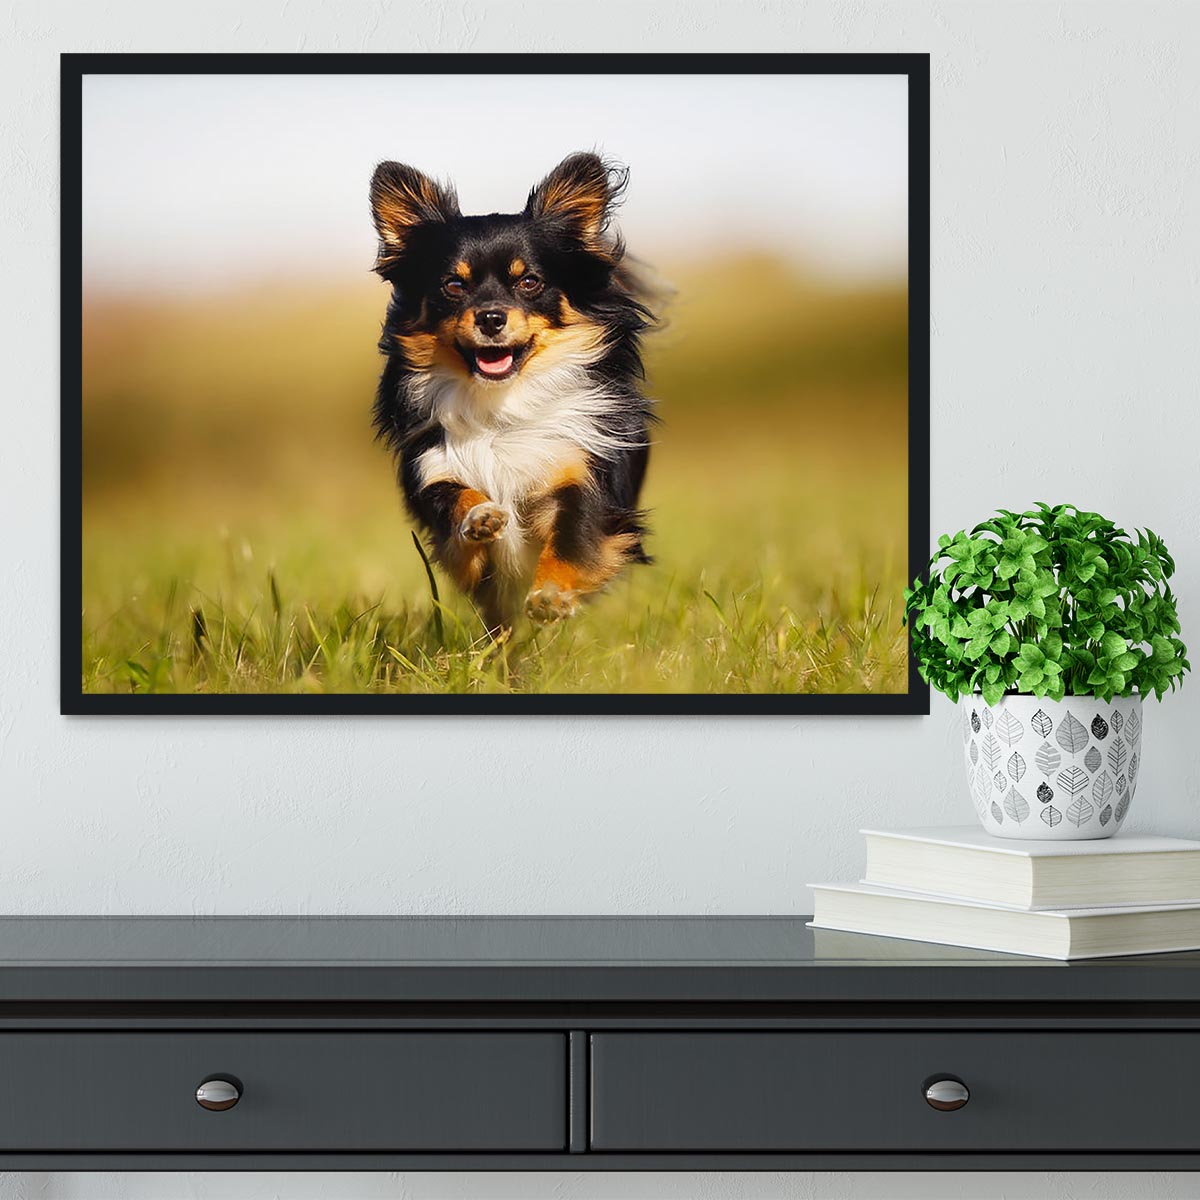 Chihuahua dog running towards the camera in a grass field Framed Print - Canvas Art Rocks - 2